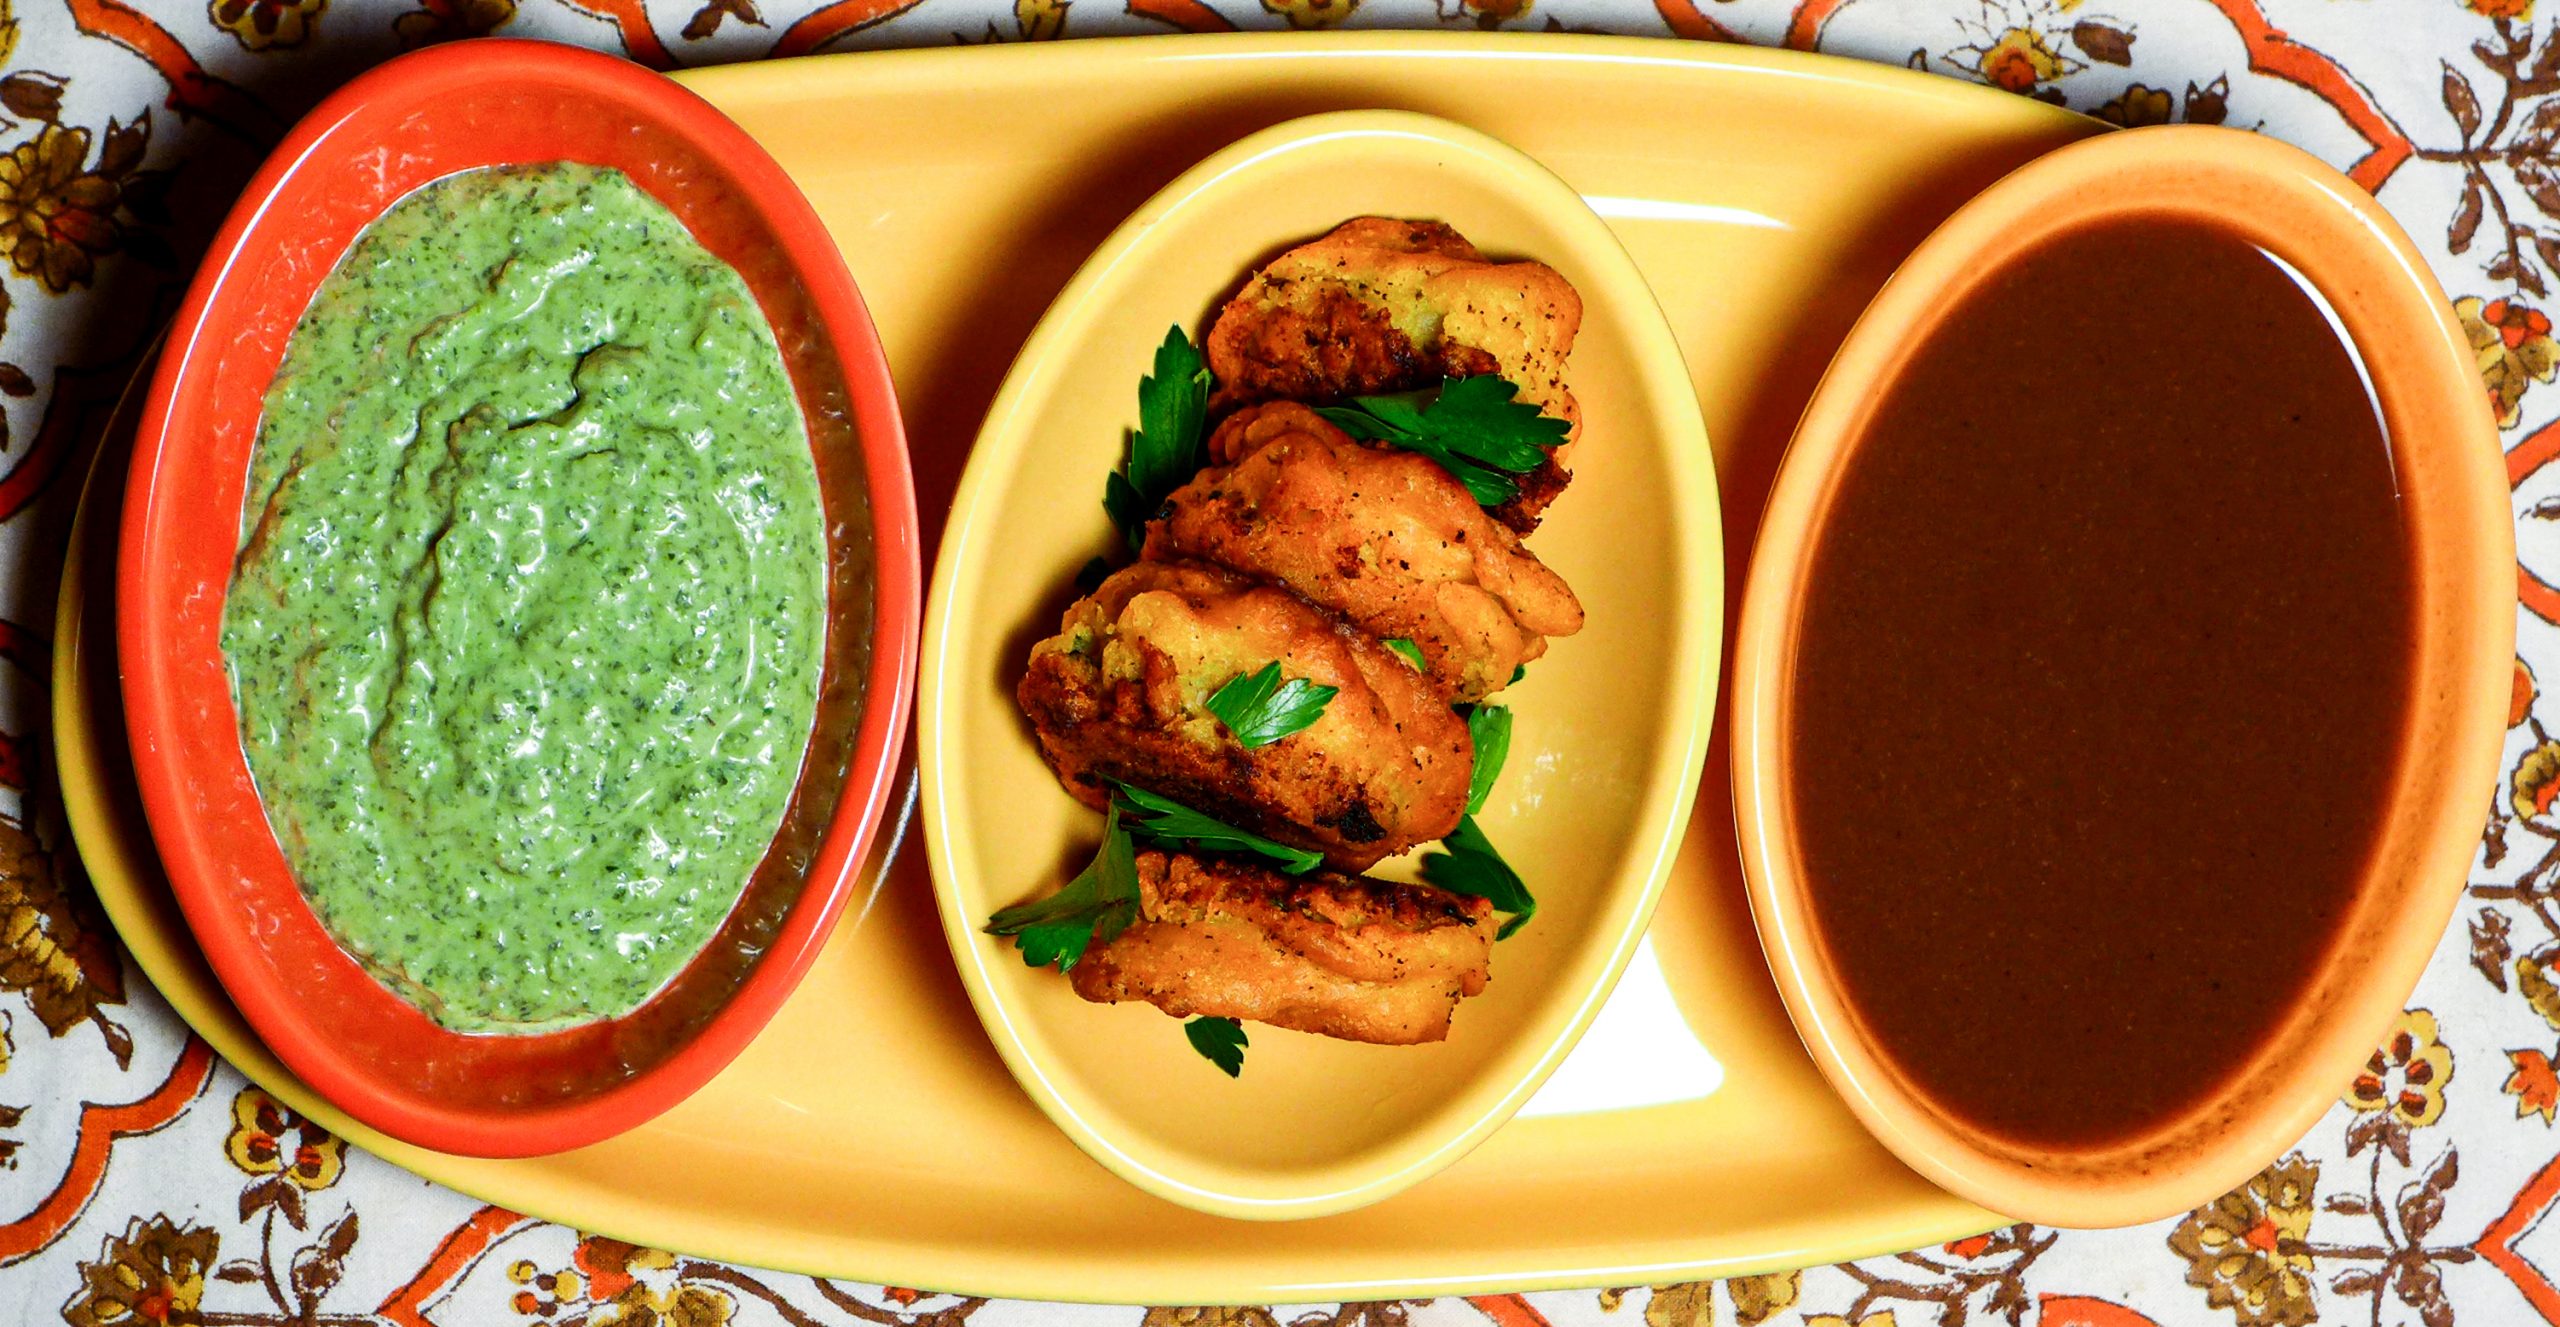 BATATA VADA: Indian Potato Fritters with Mustard, Cumin, Curry, and Ginger (served with Green Coriander-Mint Chutney)